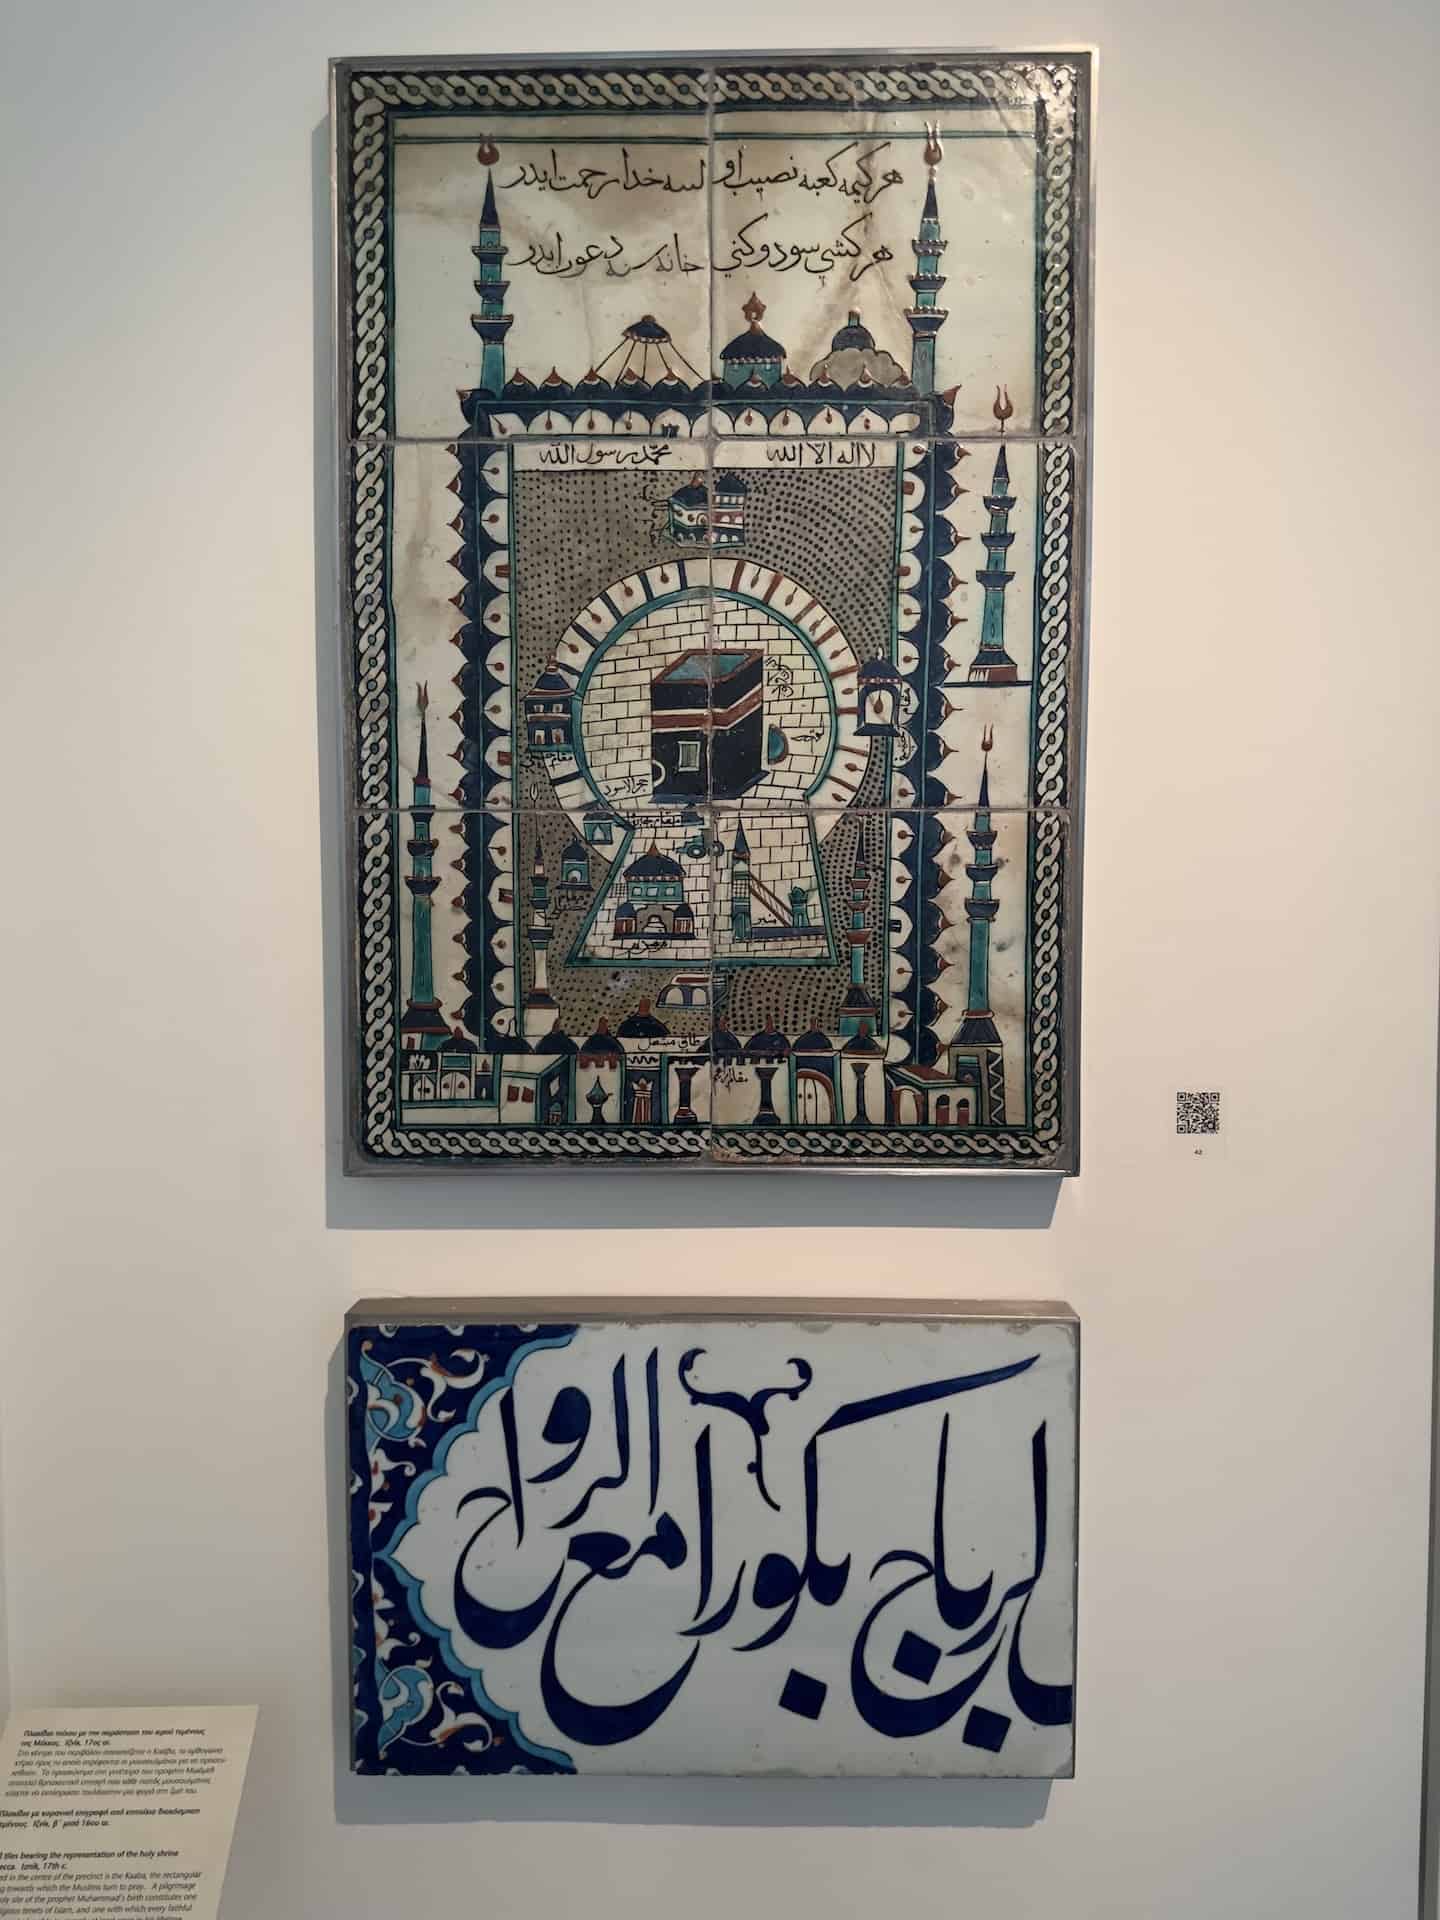 Wall tiles bearing the representation of the holy shrine of Mecca; Iznik; 17th century (top) and Tile with a Quranic inscription from the wall decoration of a mosque; Iznik; second half of the 16th century (bottom) at the Benaki Museum of Islamic Art in Athens, Greece